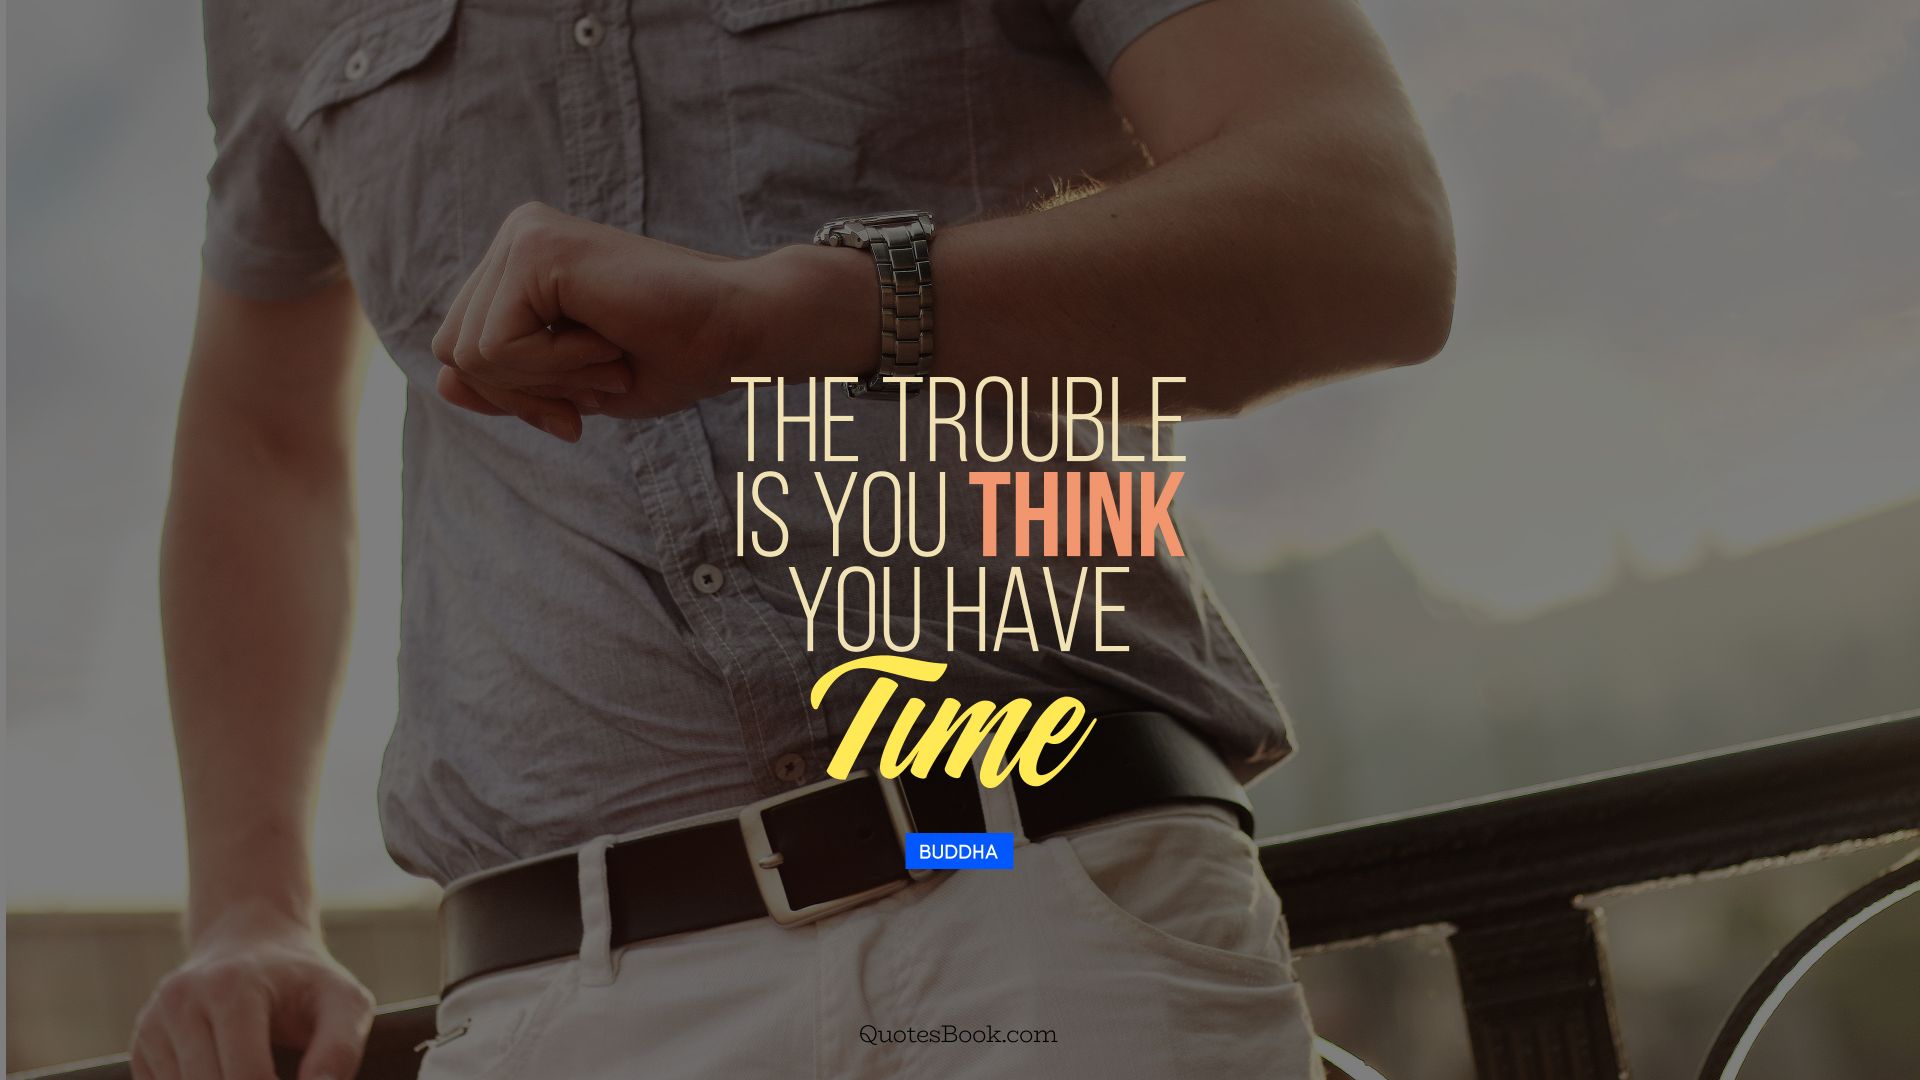 The trouble is you think you have time. - Quote by Buddha